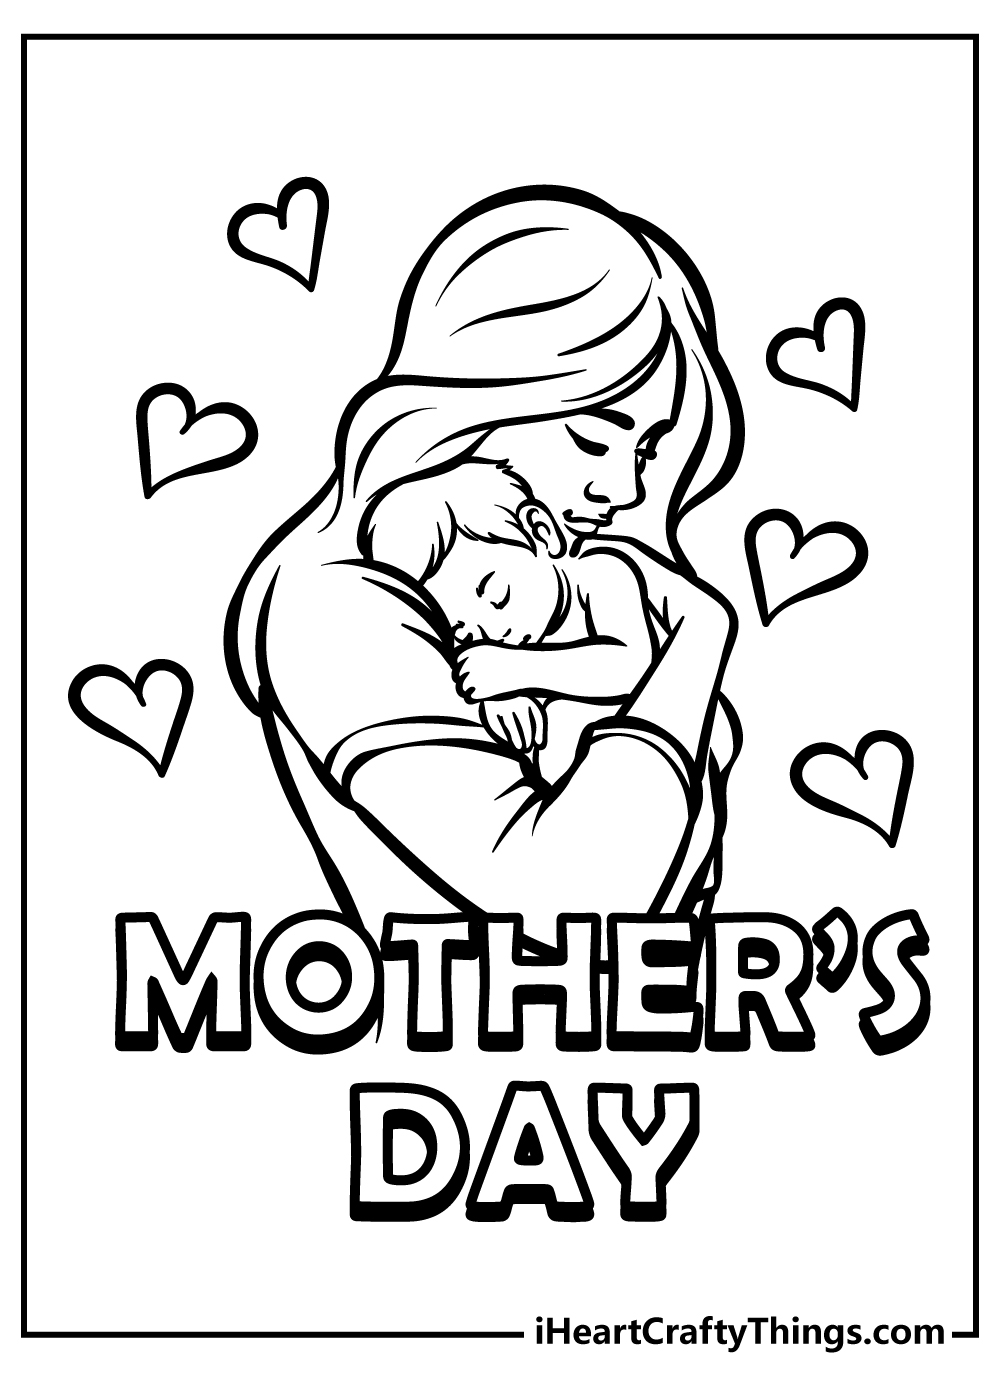 Mother's Day Drawing || How to draw Mother's Day drawing - YouTube